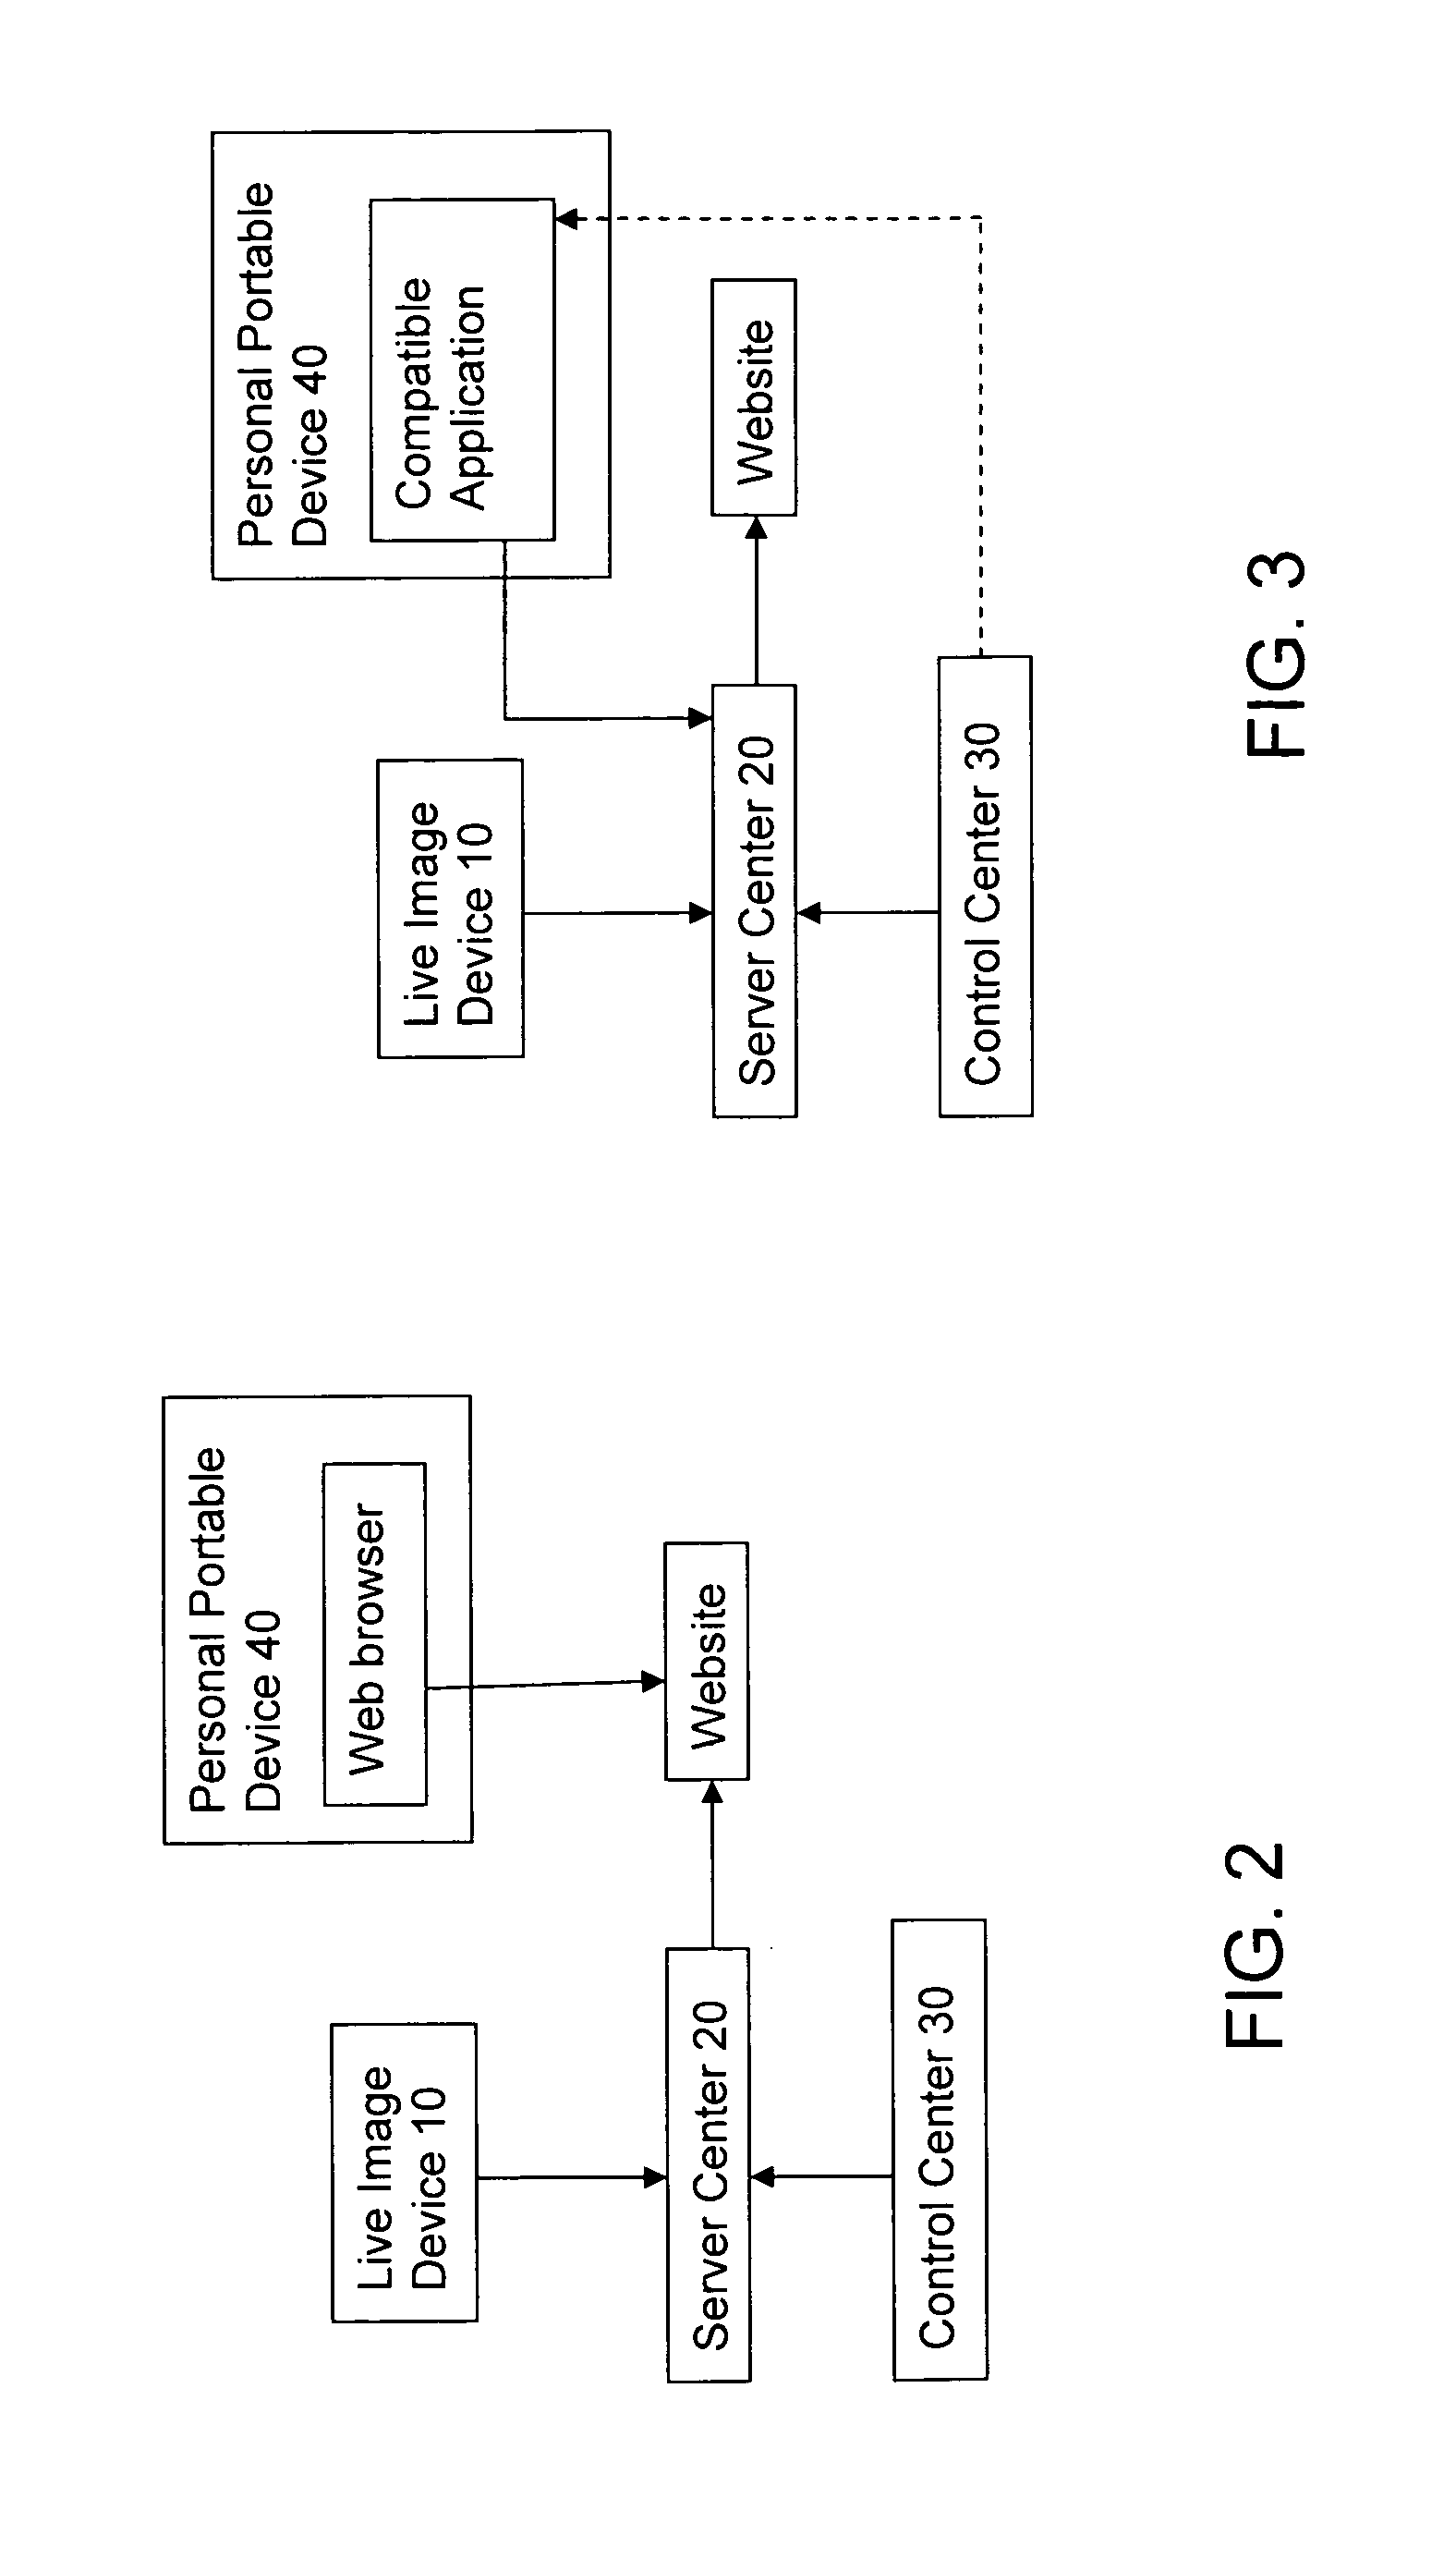 Method and apparatus for live capture image-live streaming camera utilizing personal portable device